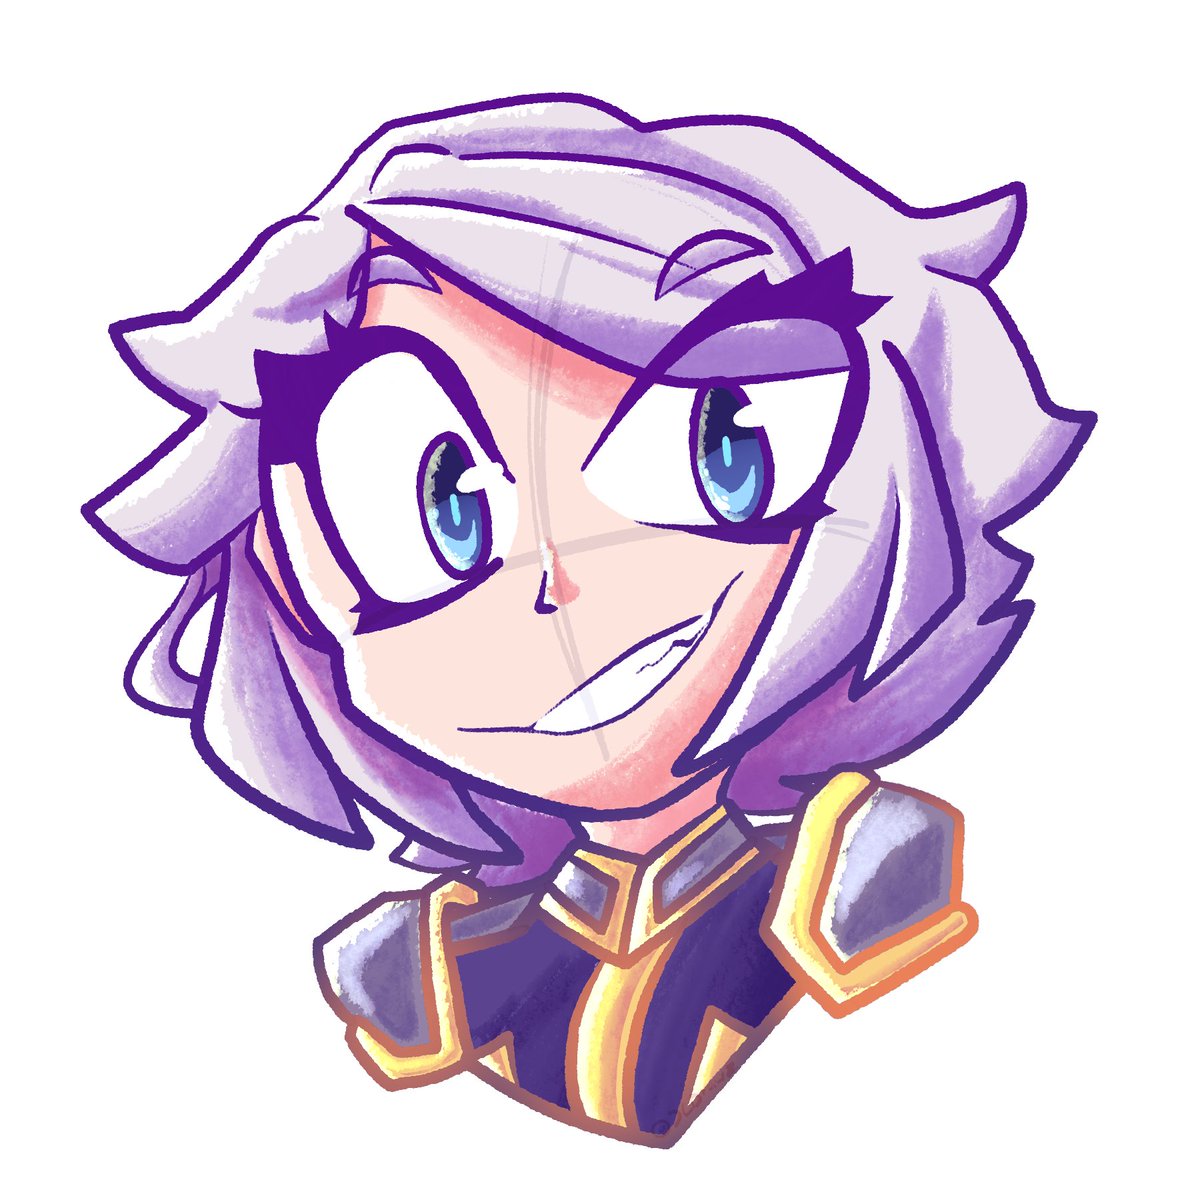 Headshot (Style 2) c0mm from @Vex_of_Void for @Bar0sa of Honor !! Such a cool character!